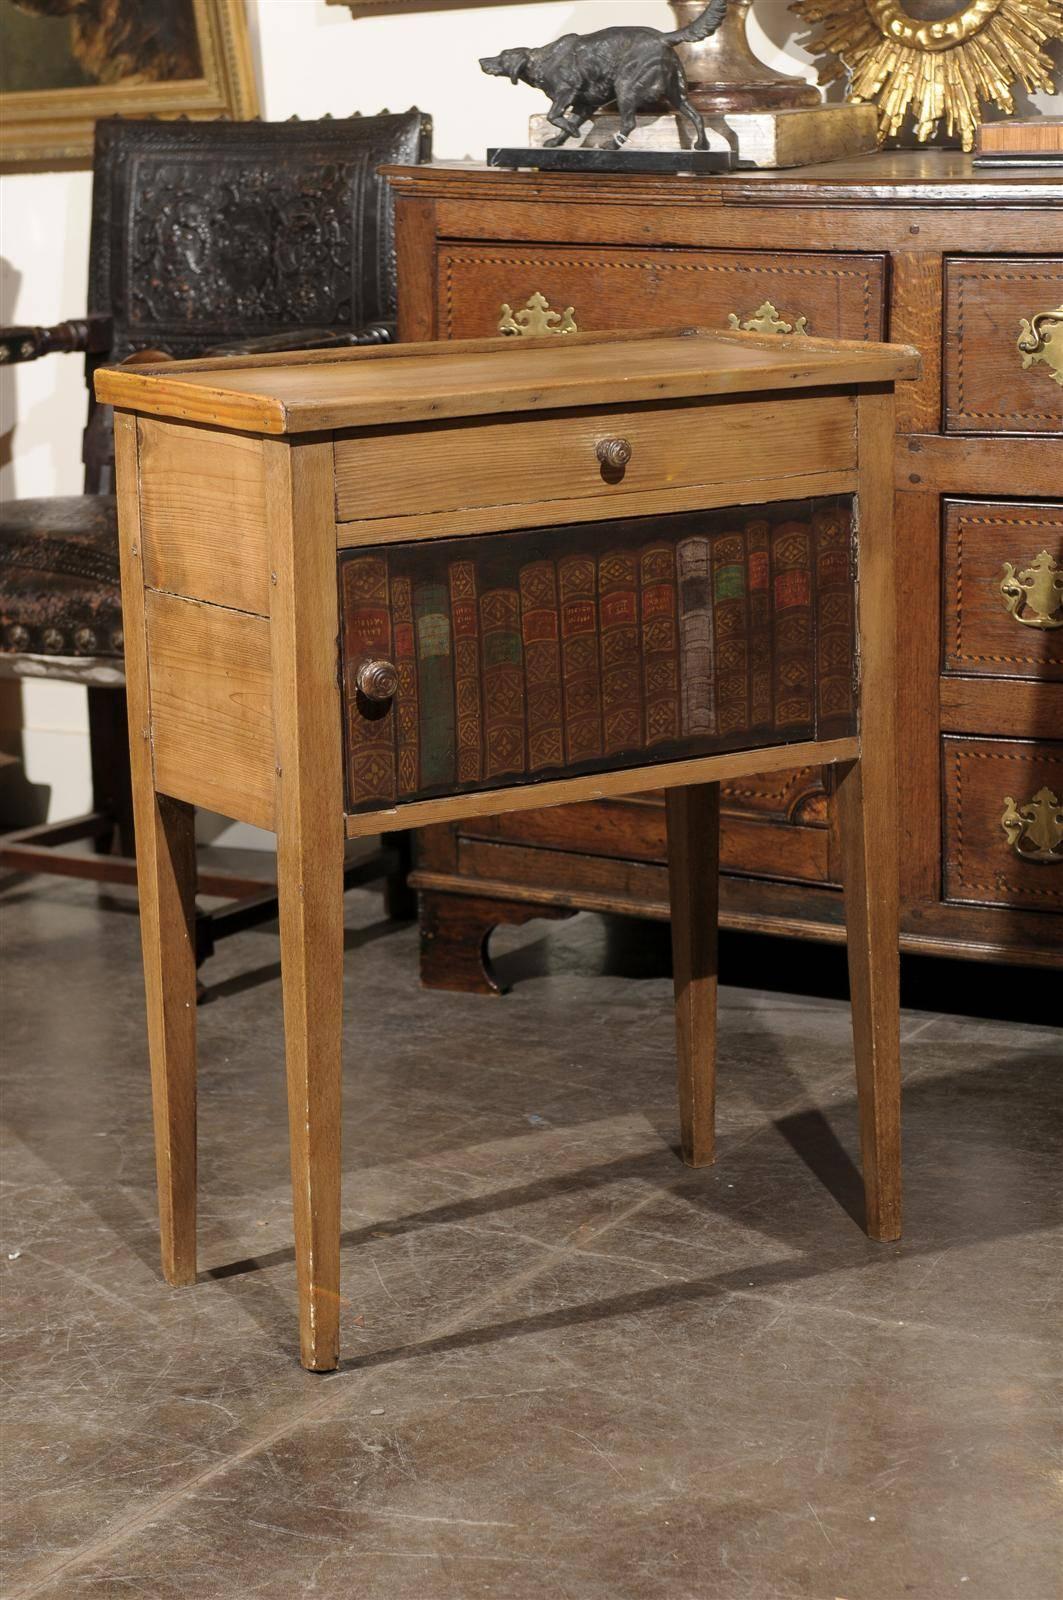 An English side table with drawer and faux book door from the late 1800s. This uncommon English side table in pine features a rectangular top on a belt with one drawer and a cupboard with a painted faux book door. The structure rests on four